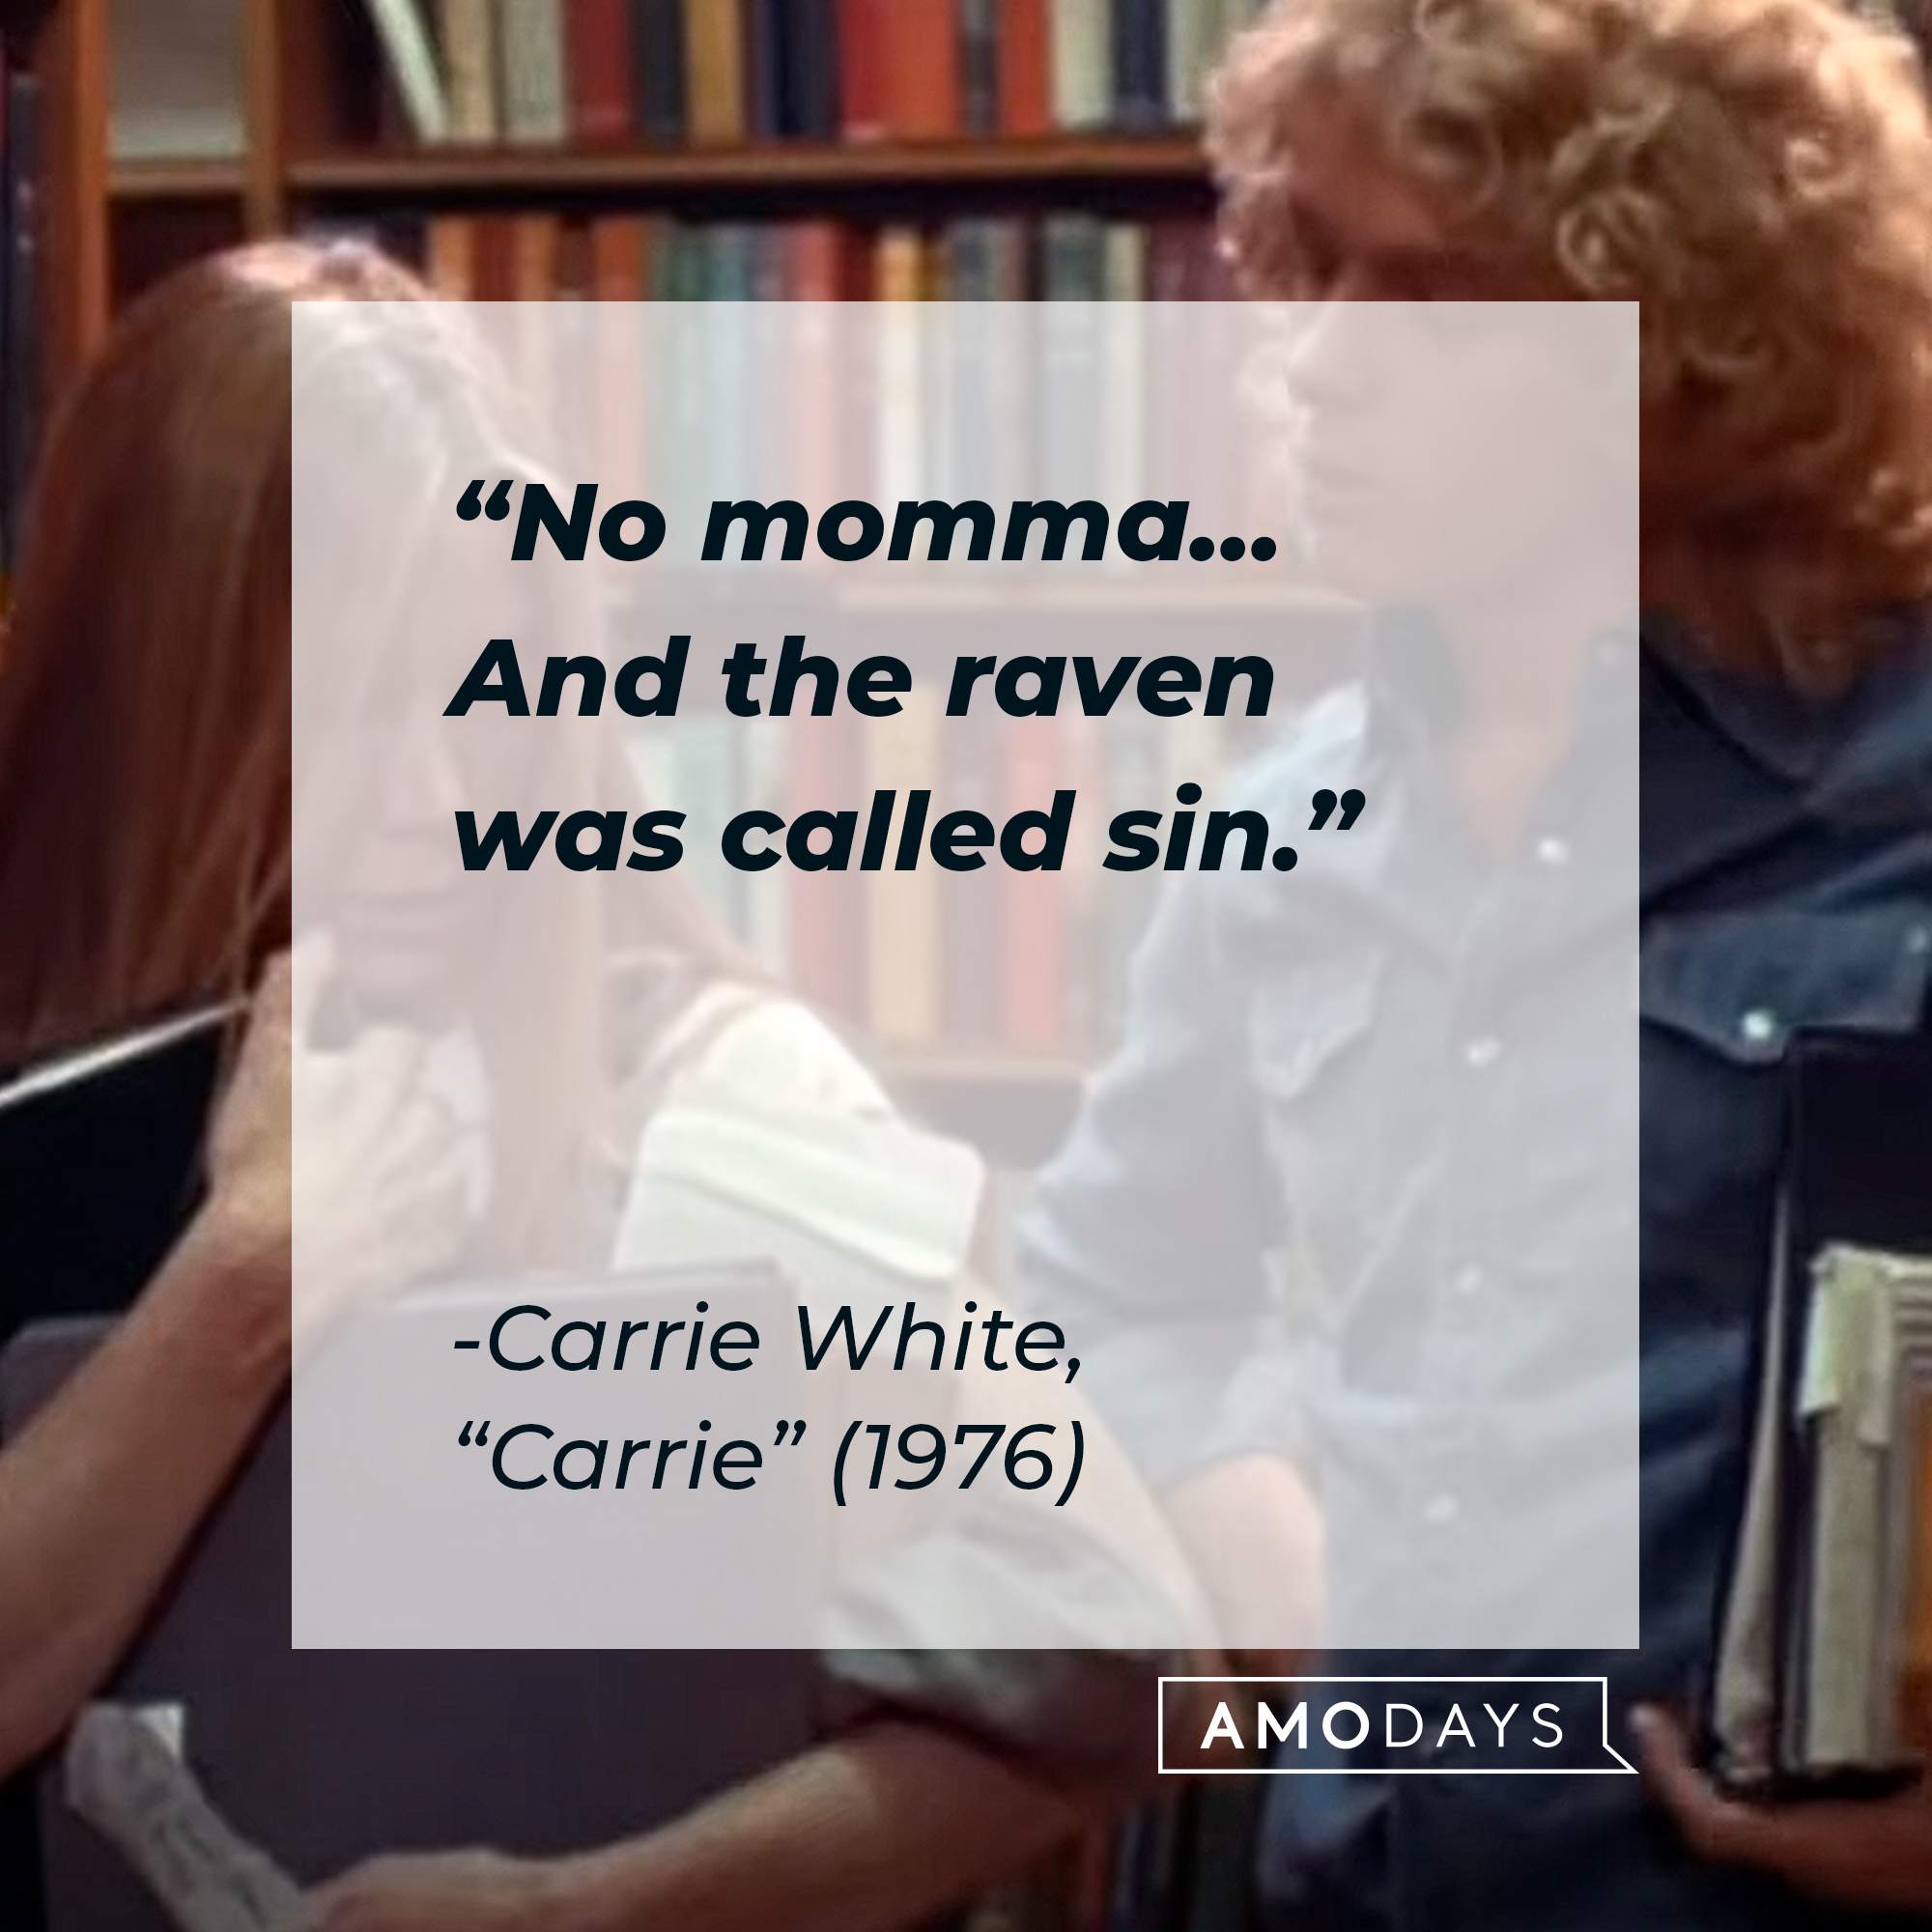 Carrie White's quote: "No momma... And the raven was called sin." | Source: youtube.com/MGMStudios